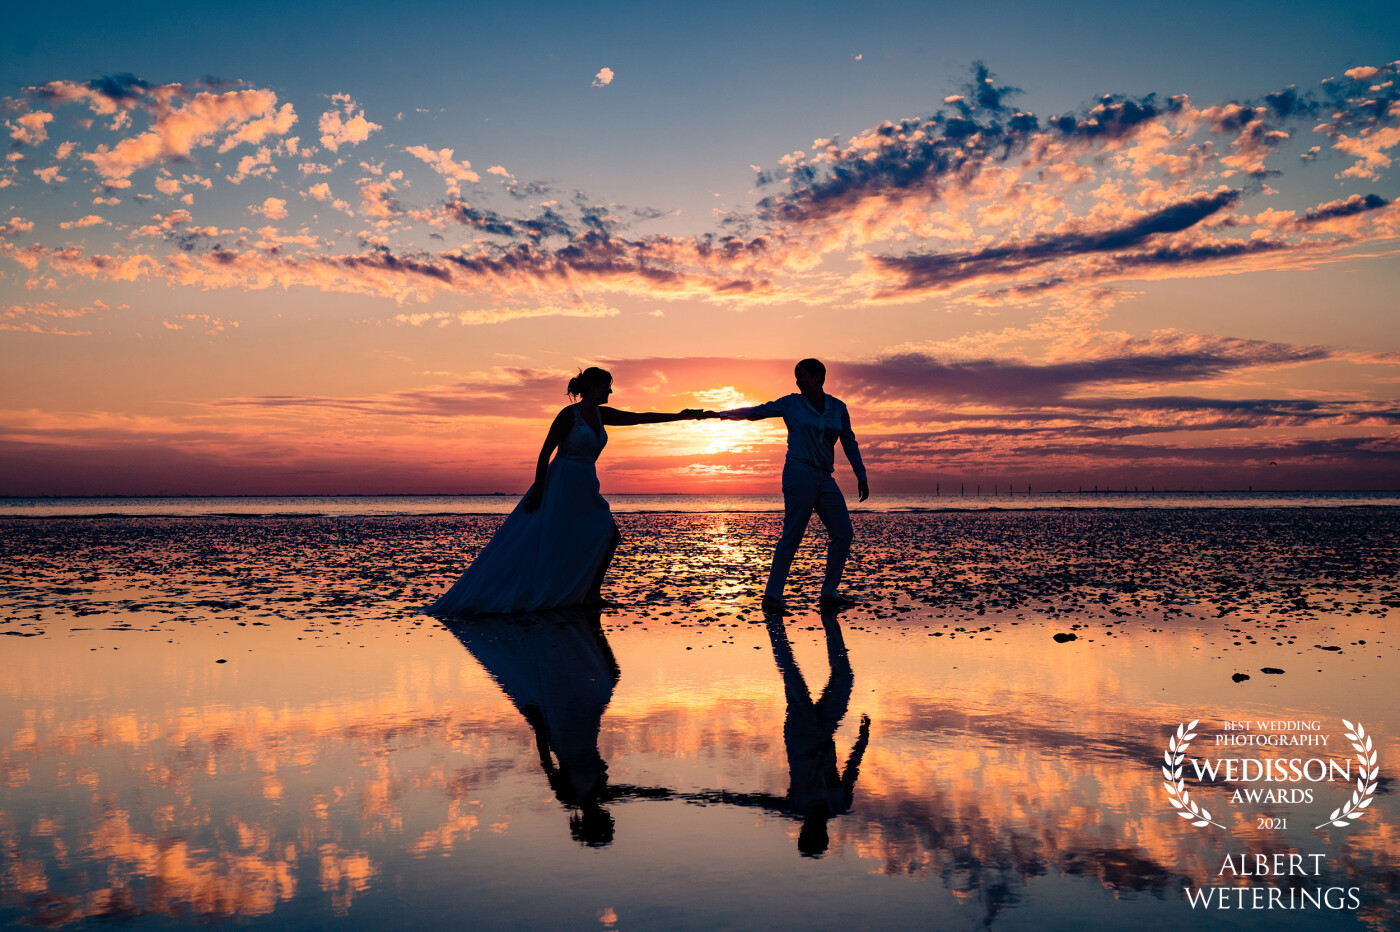 Our most crazy, funny couple of the year. Yentl & Marijke were not afraid of anything. Water & sand? No problem. Lets enjoy this great sunset on our weddingday they said. What a romantic result!